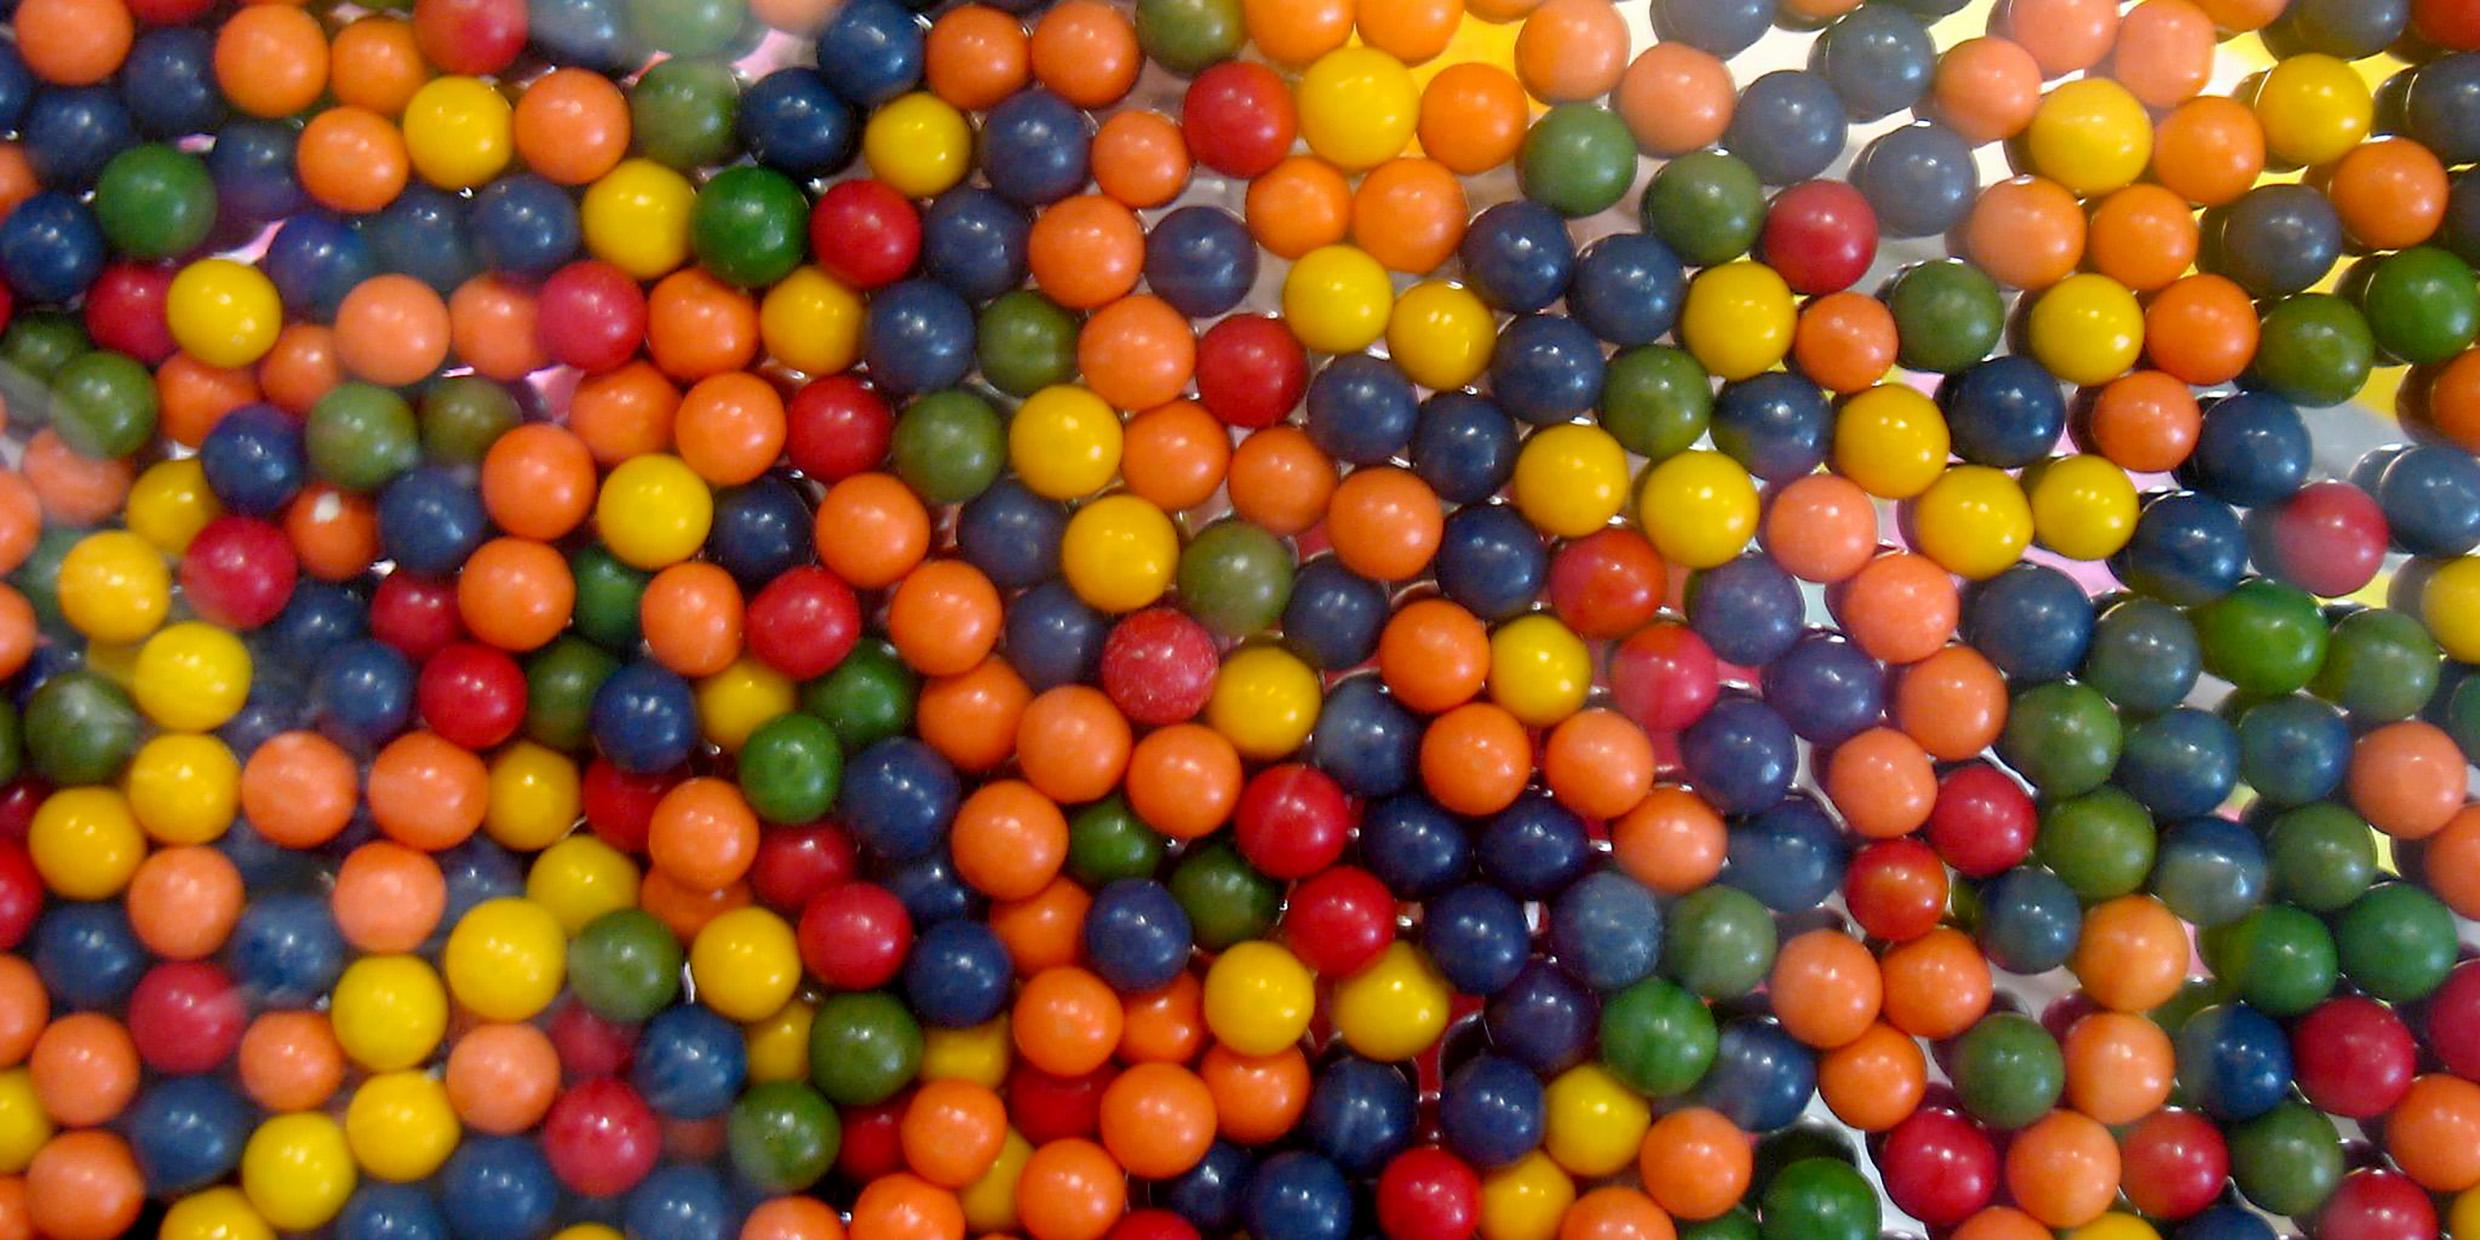 Image of gumballs packed together